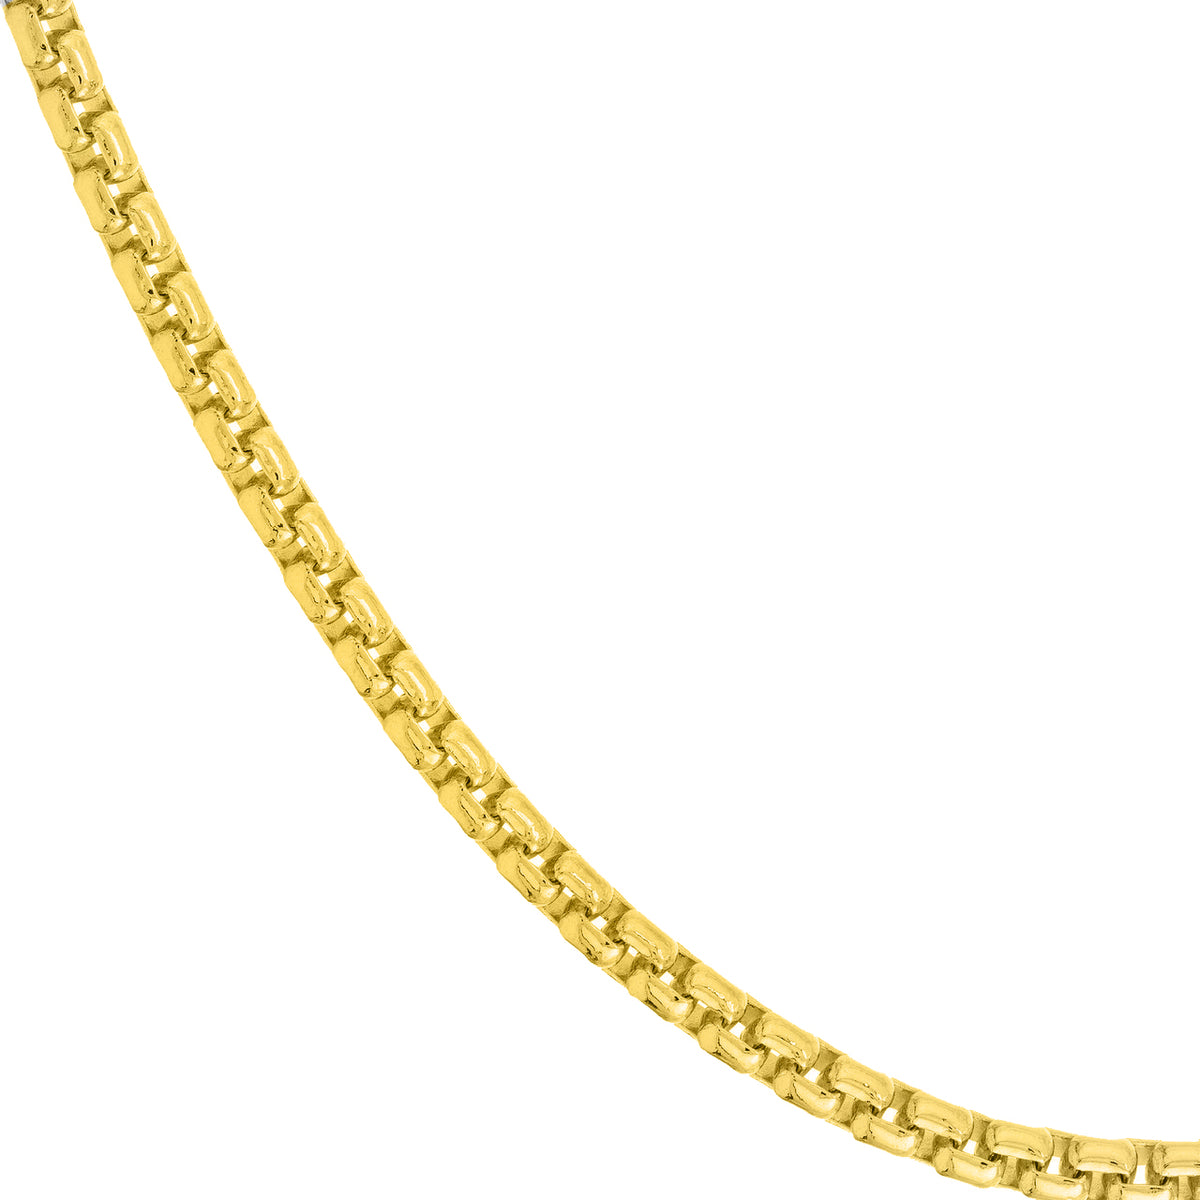 Solid 14k Yellow Gold 4mm Round Box Chain Necklace with Lobster Lock